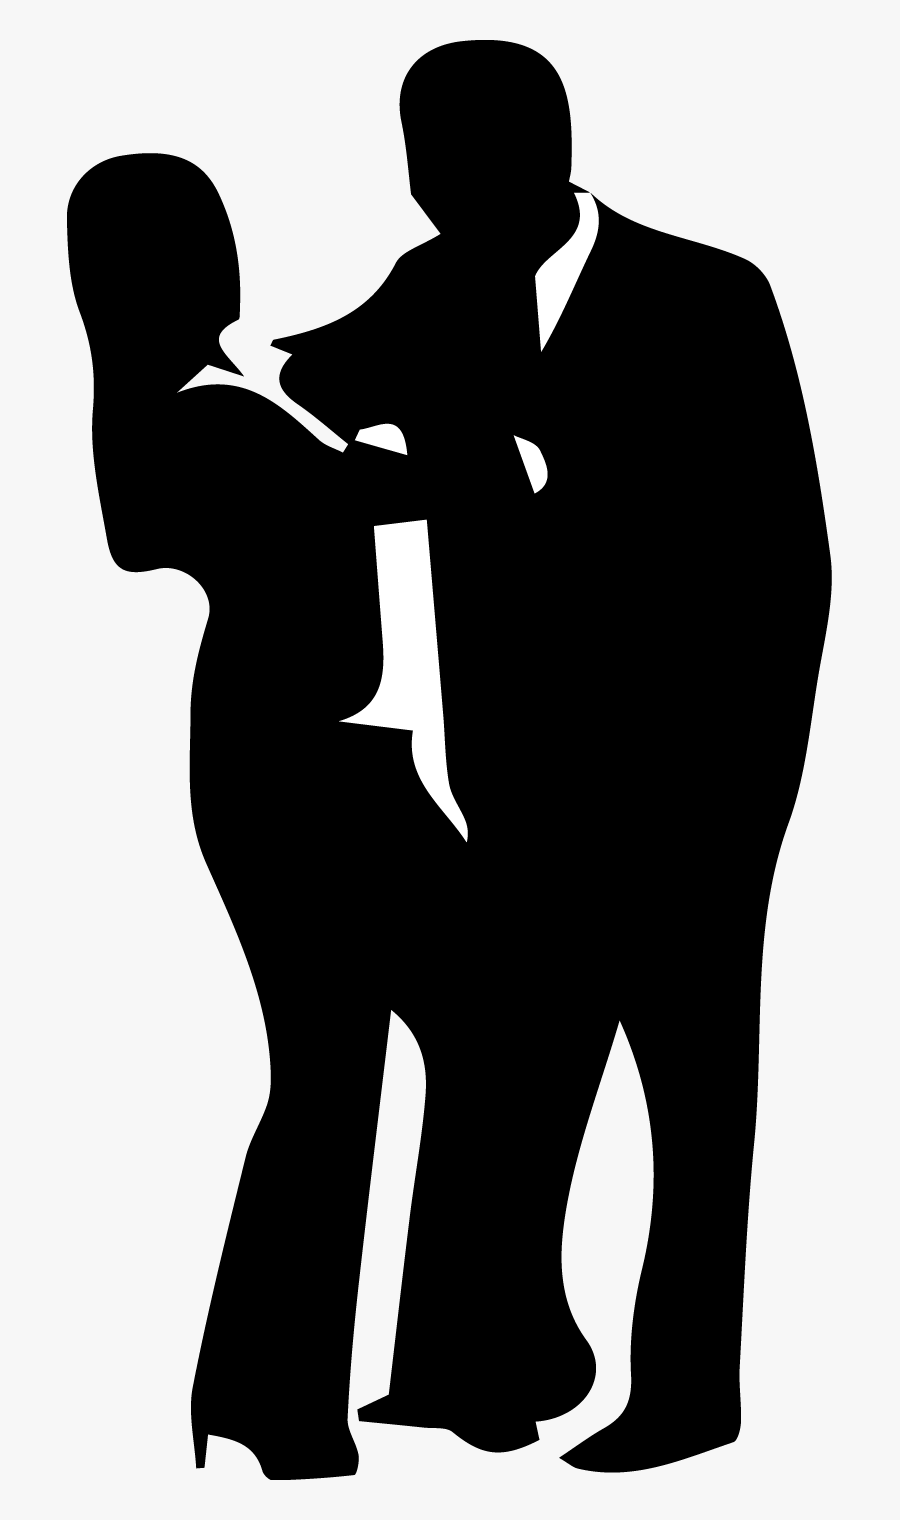 Work Sexual Harassment Couple, free clipart download, png, clipart , clip a...